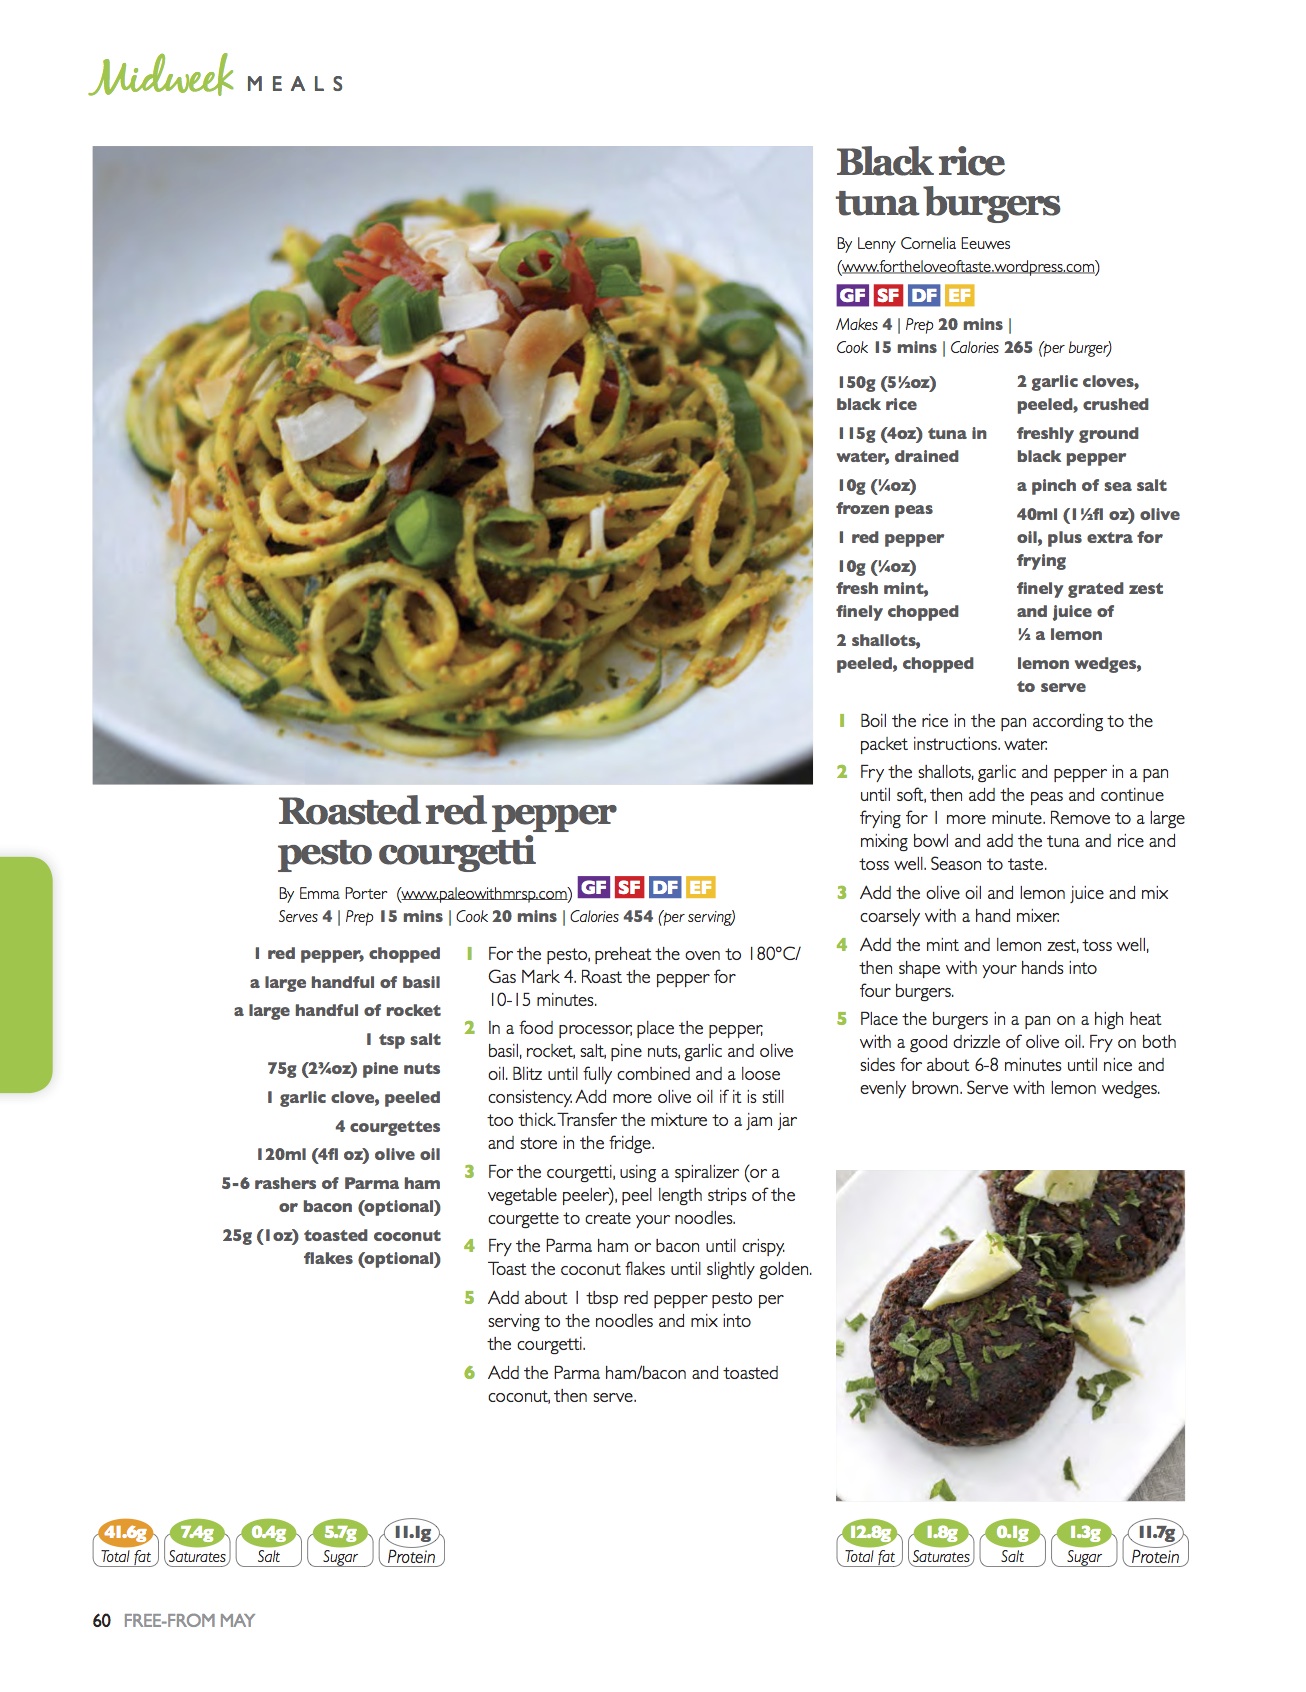 8 of my recipes were featured in Free From Magazine in May 2015, it was amazing seeing so many of my recipes in print! 